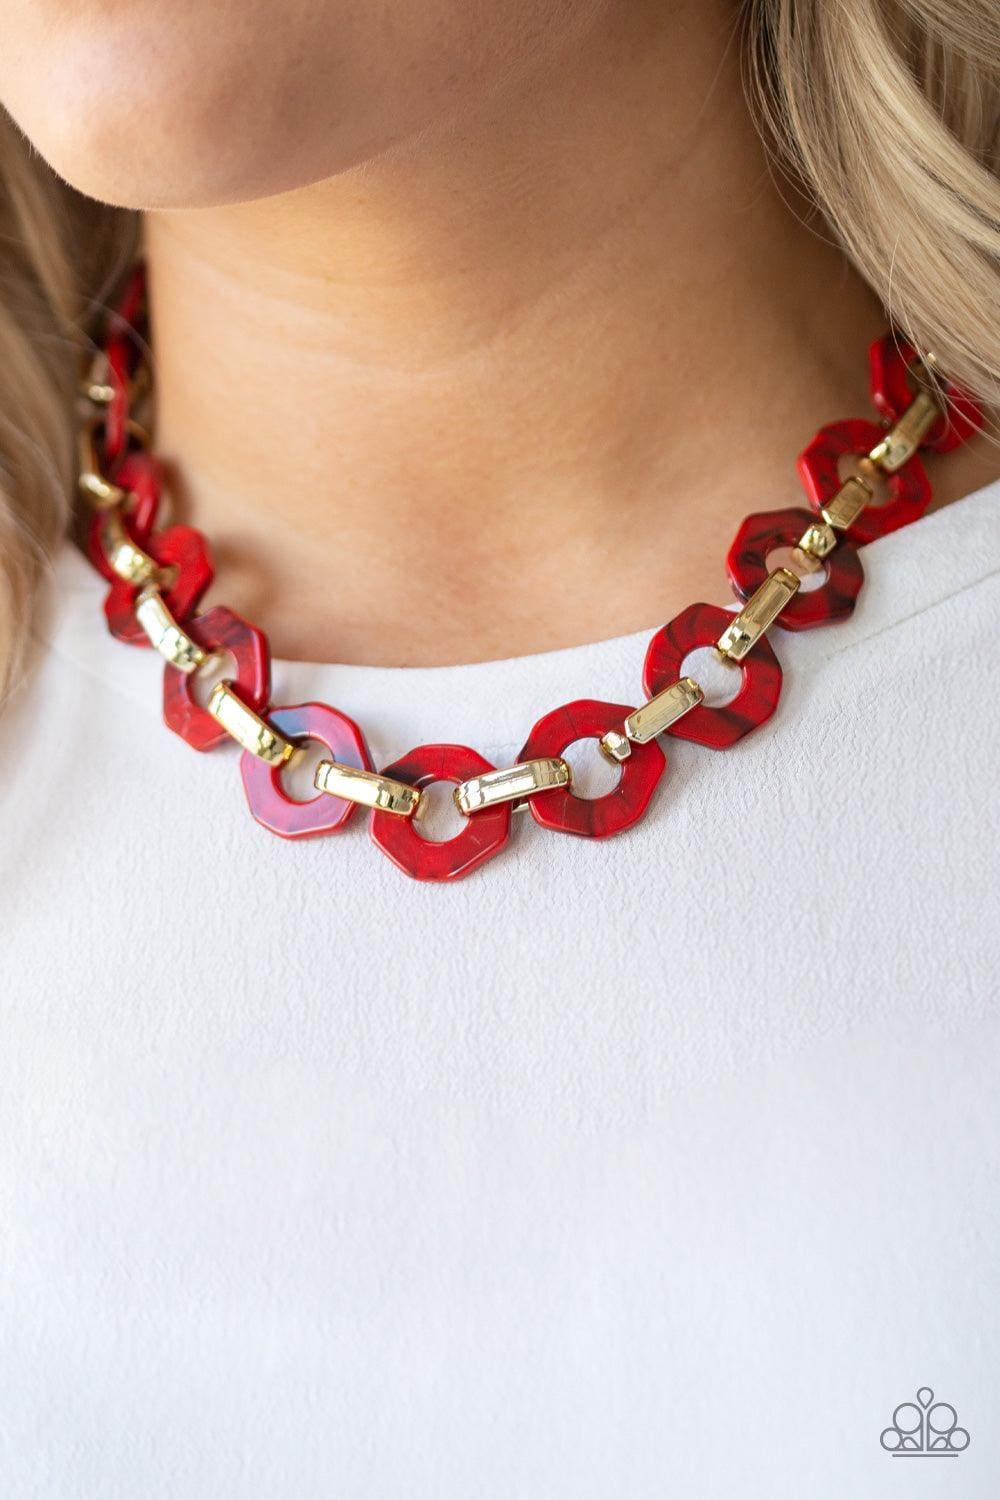 Paparazzi Accessories - Fashionista Fever - Red Necklace - Bling by JessieK